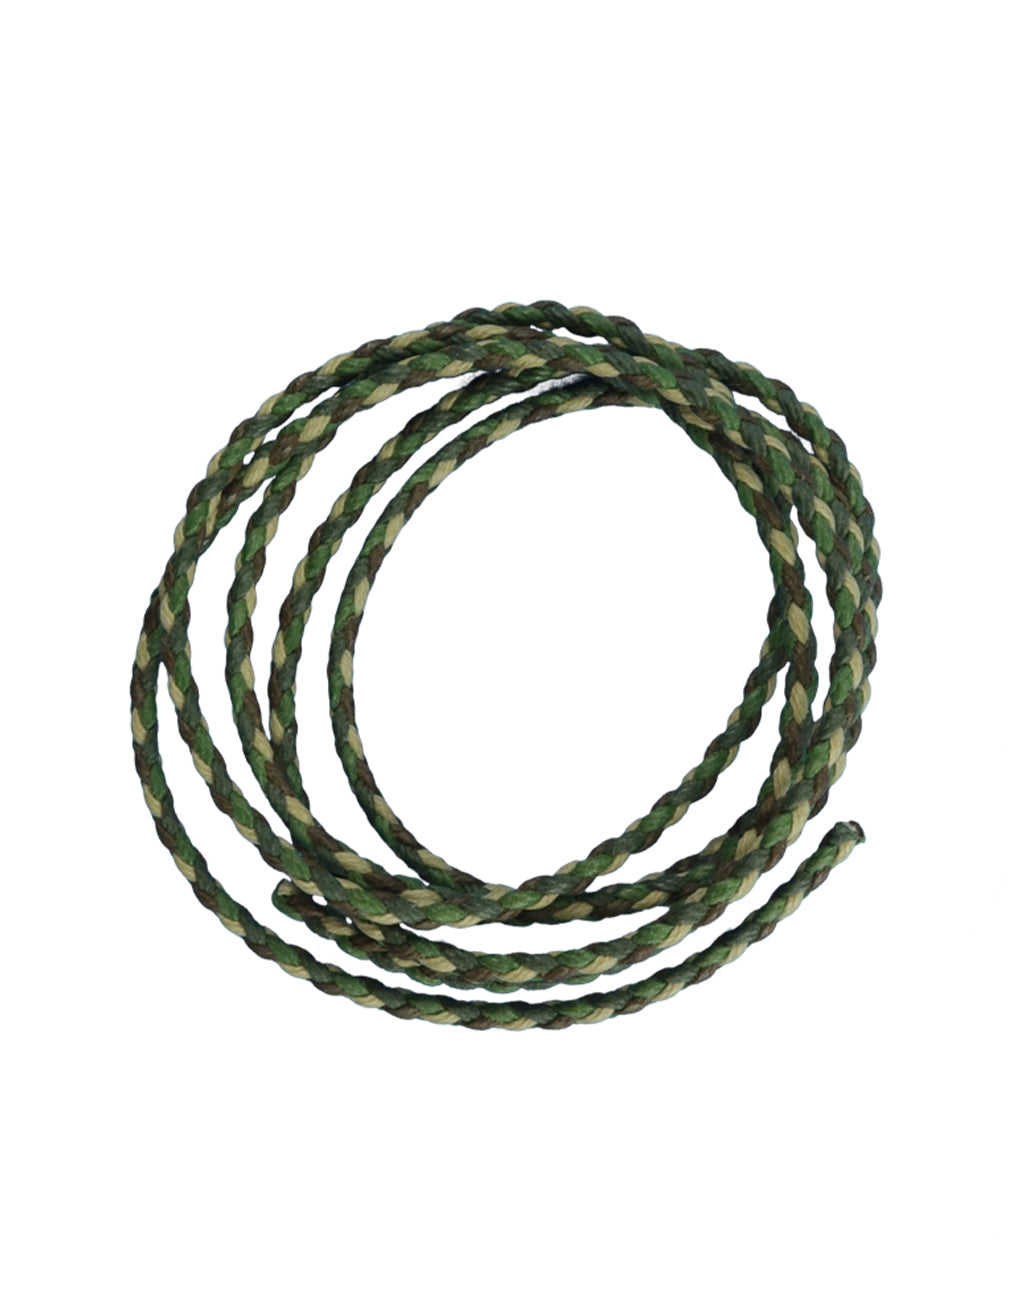 Camo Vegan Leather Braided Cord, 2mm, (9ft)